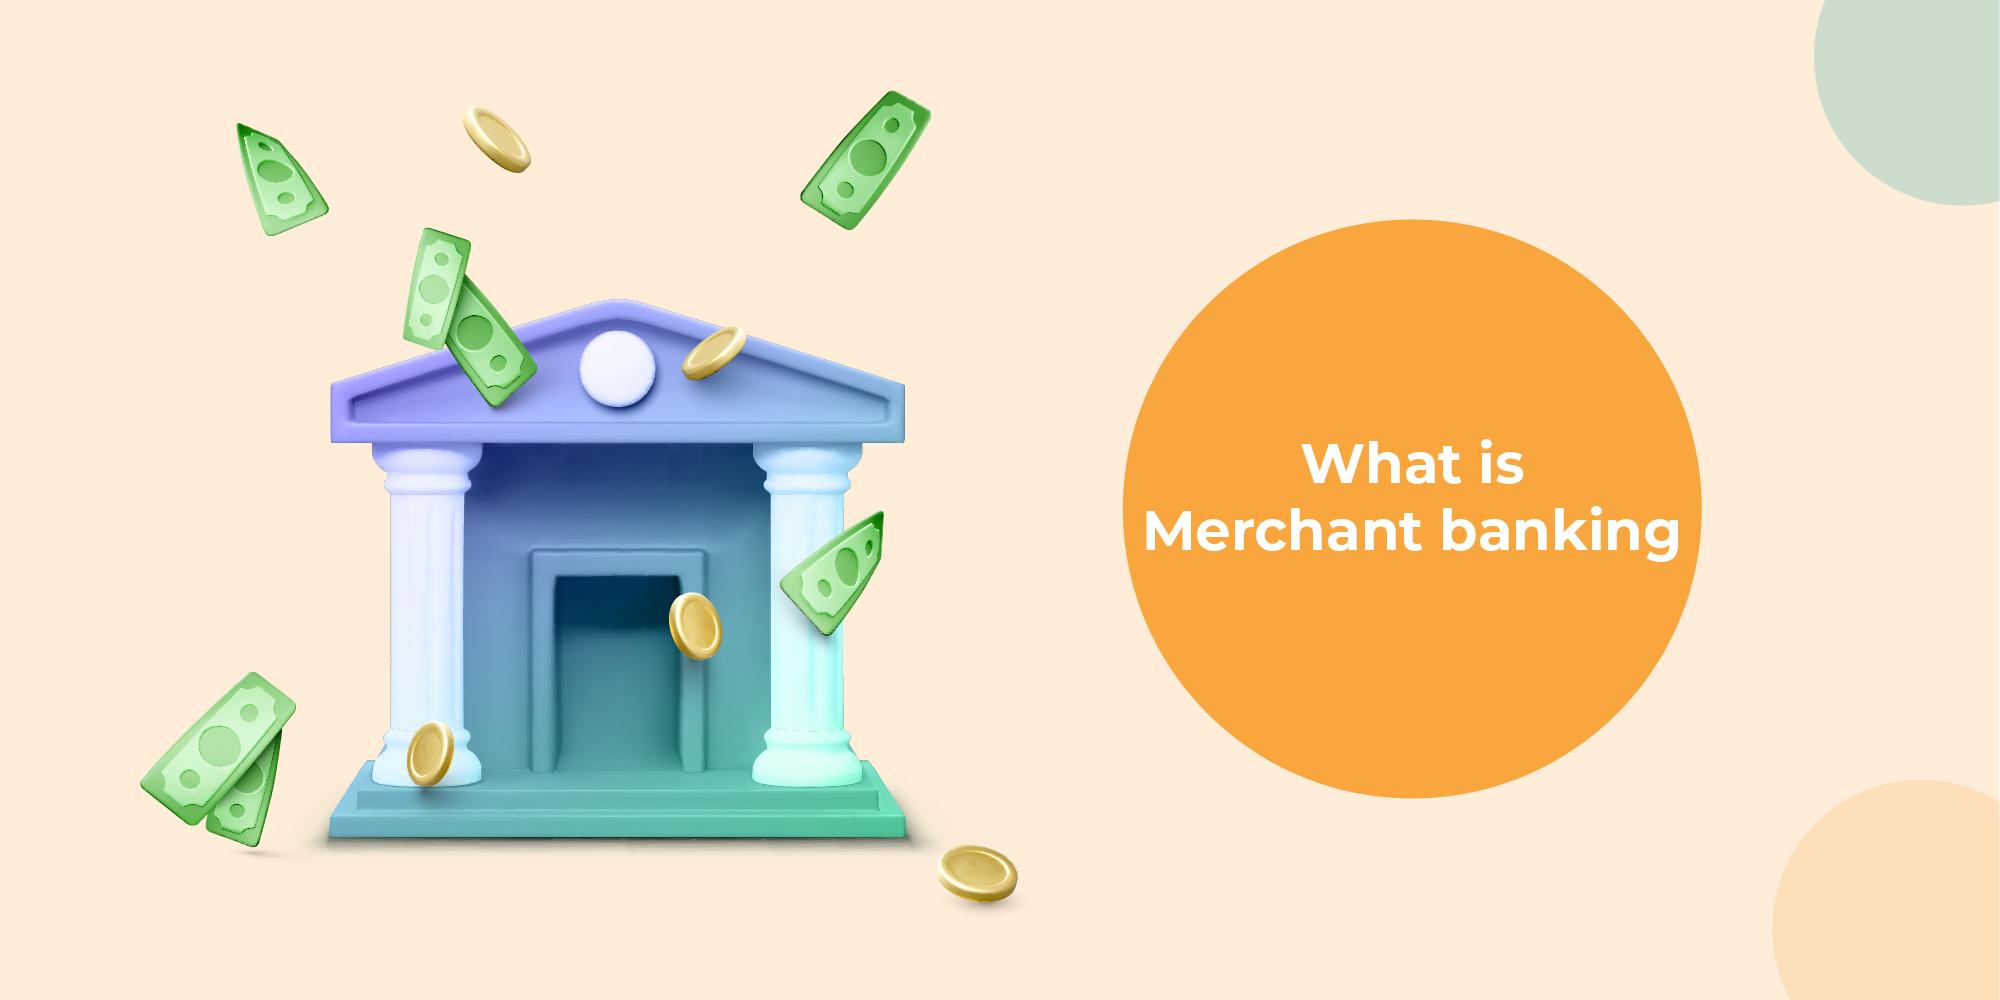 What is Merchant Banking: All you need to know